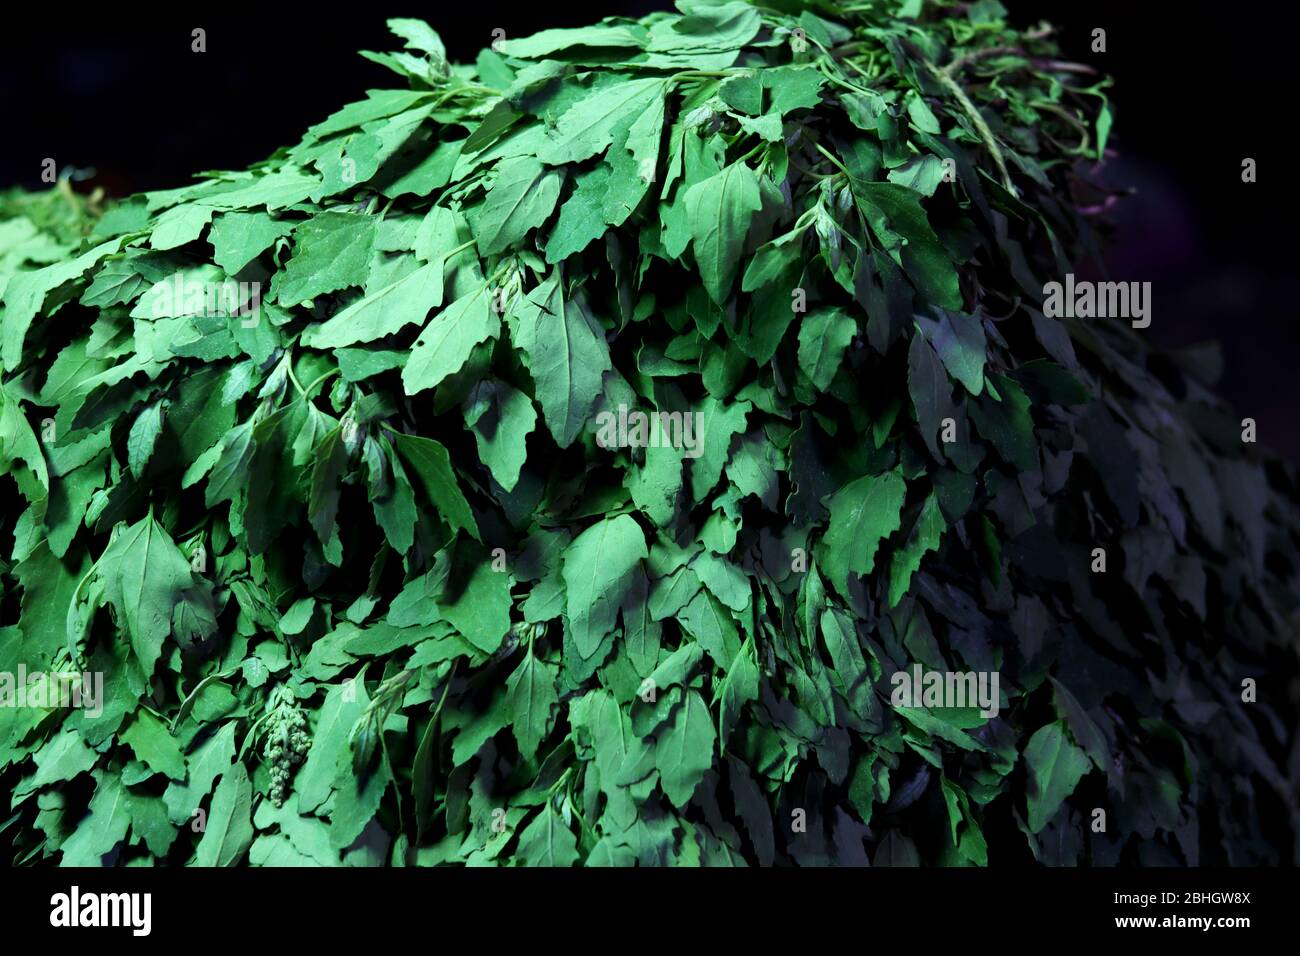 Bathua leafy vegetable for sale in market. Stock Photo